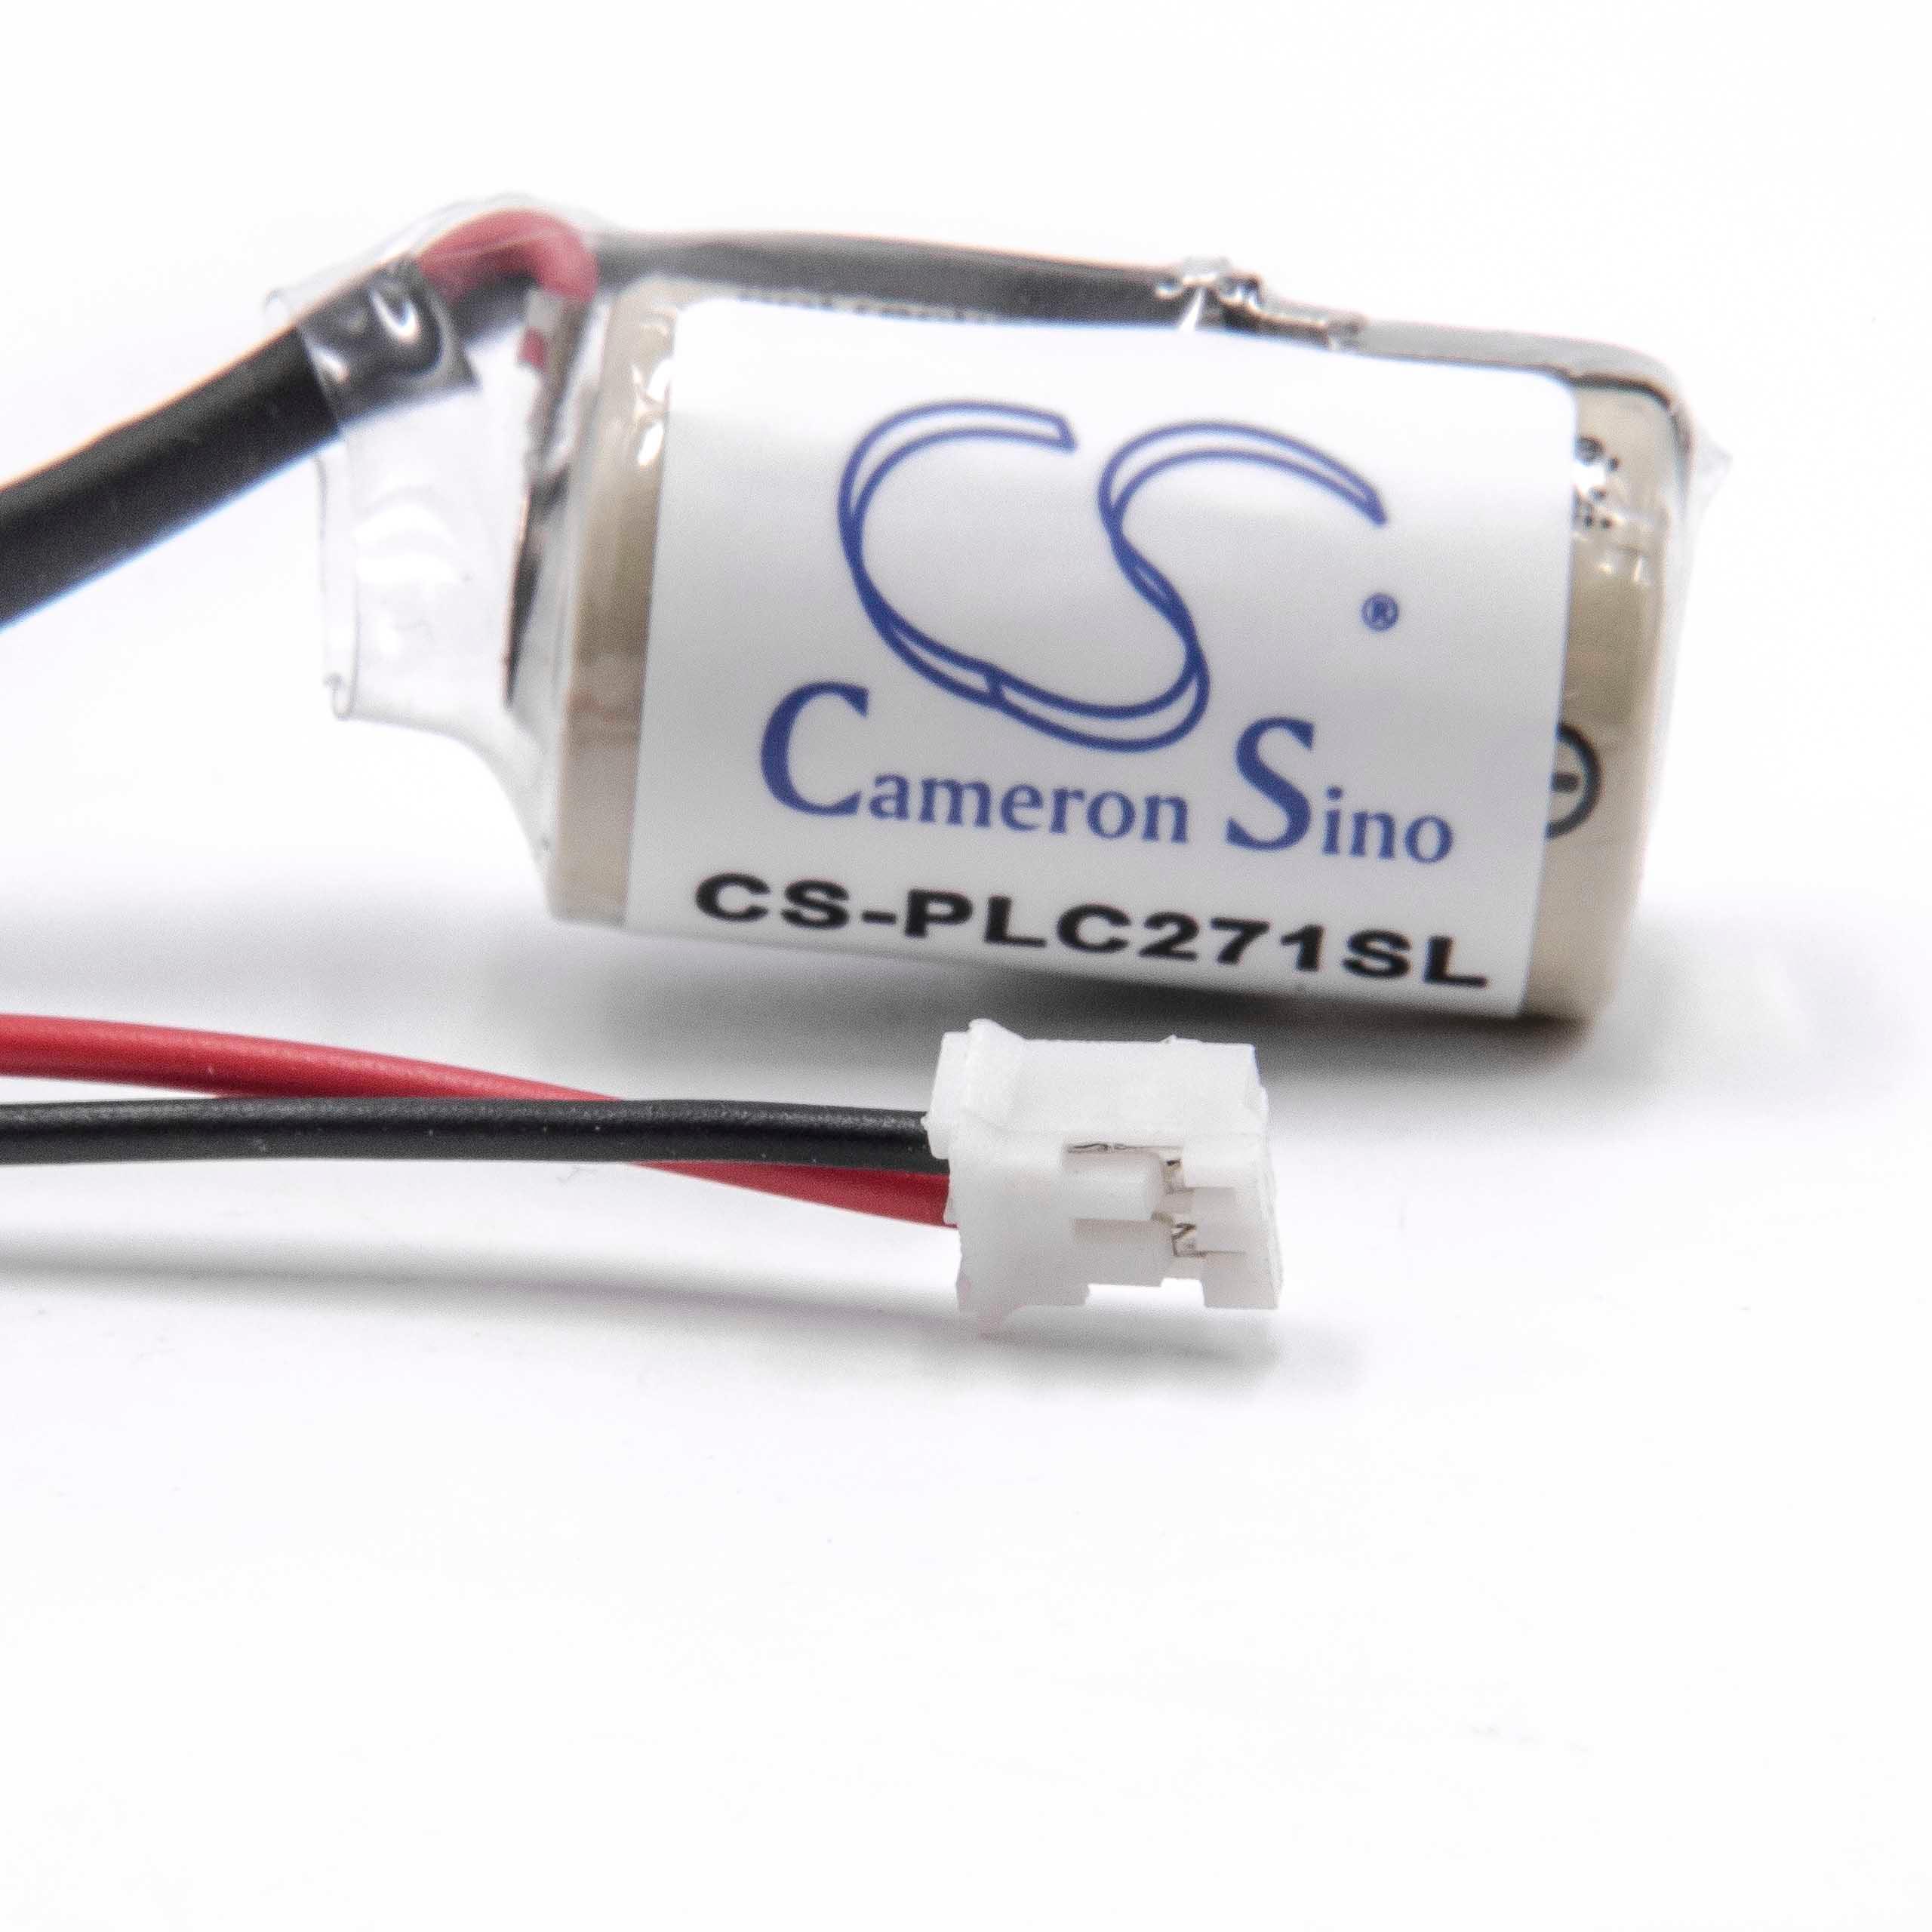 Industrial Controller Battery Replacement for Omron COMP-311, CJ1W-BAT01 - 850mAh 3V Li-MnO2